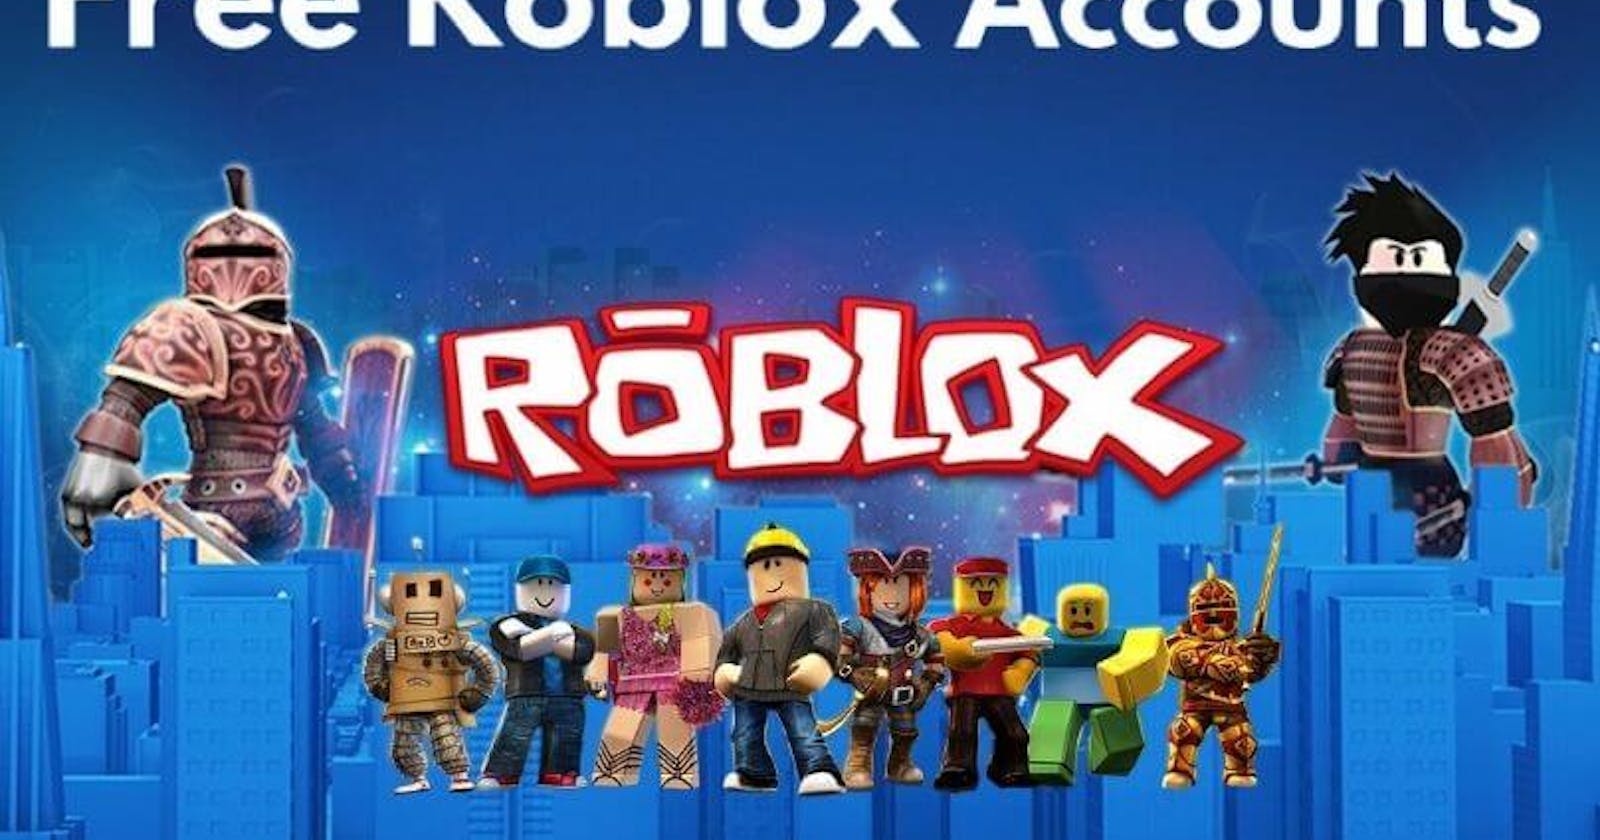 35+ Free Roblox Accounts & Password with Robux – 2022